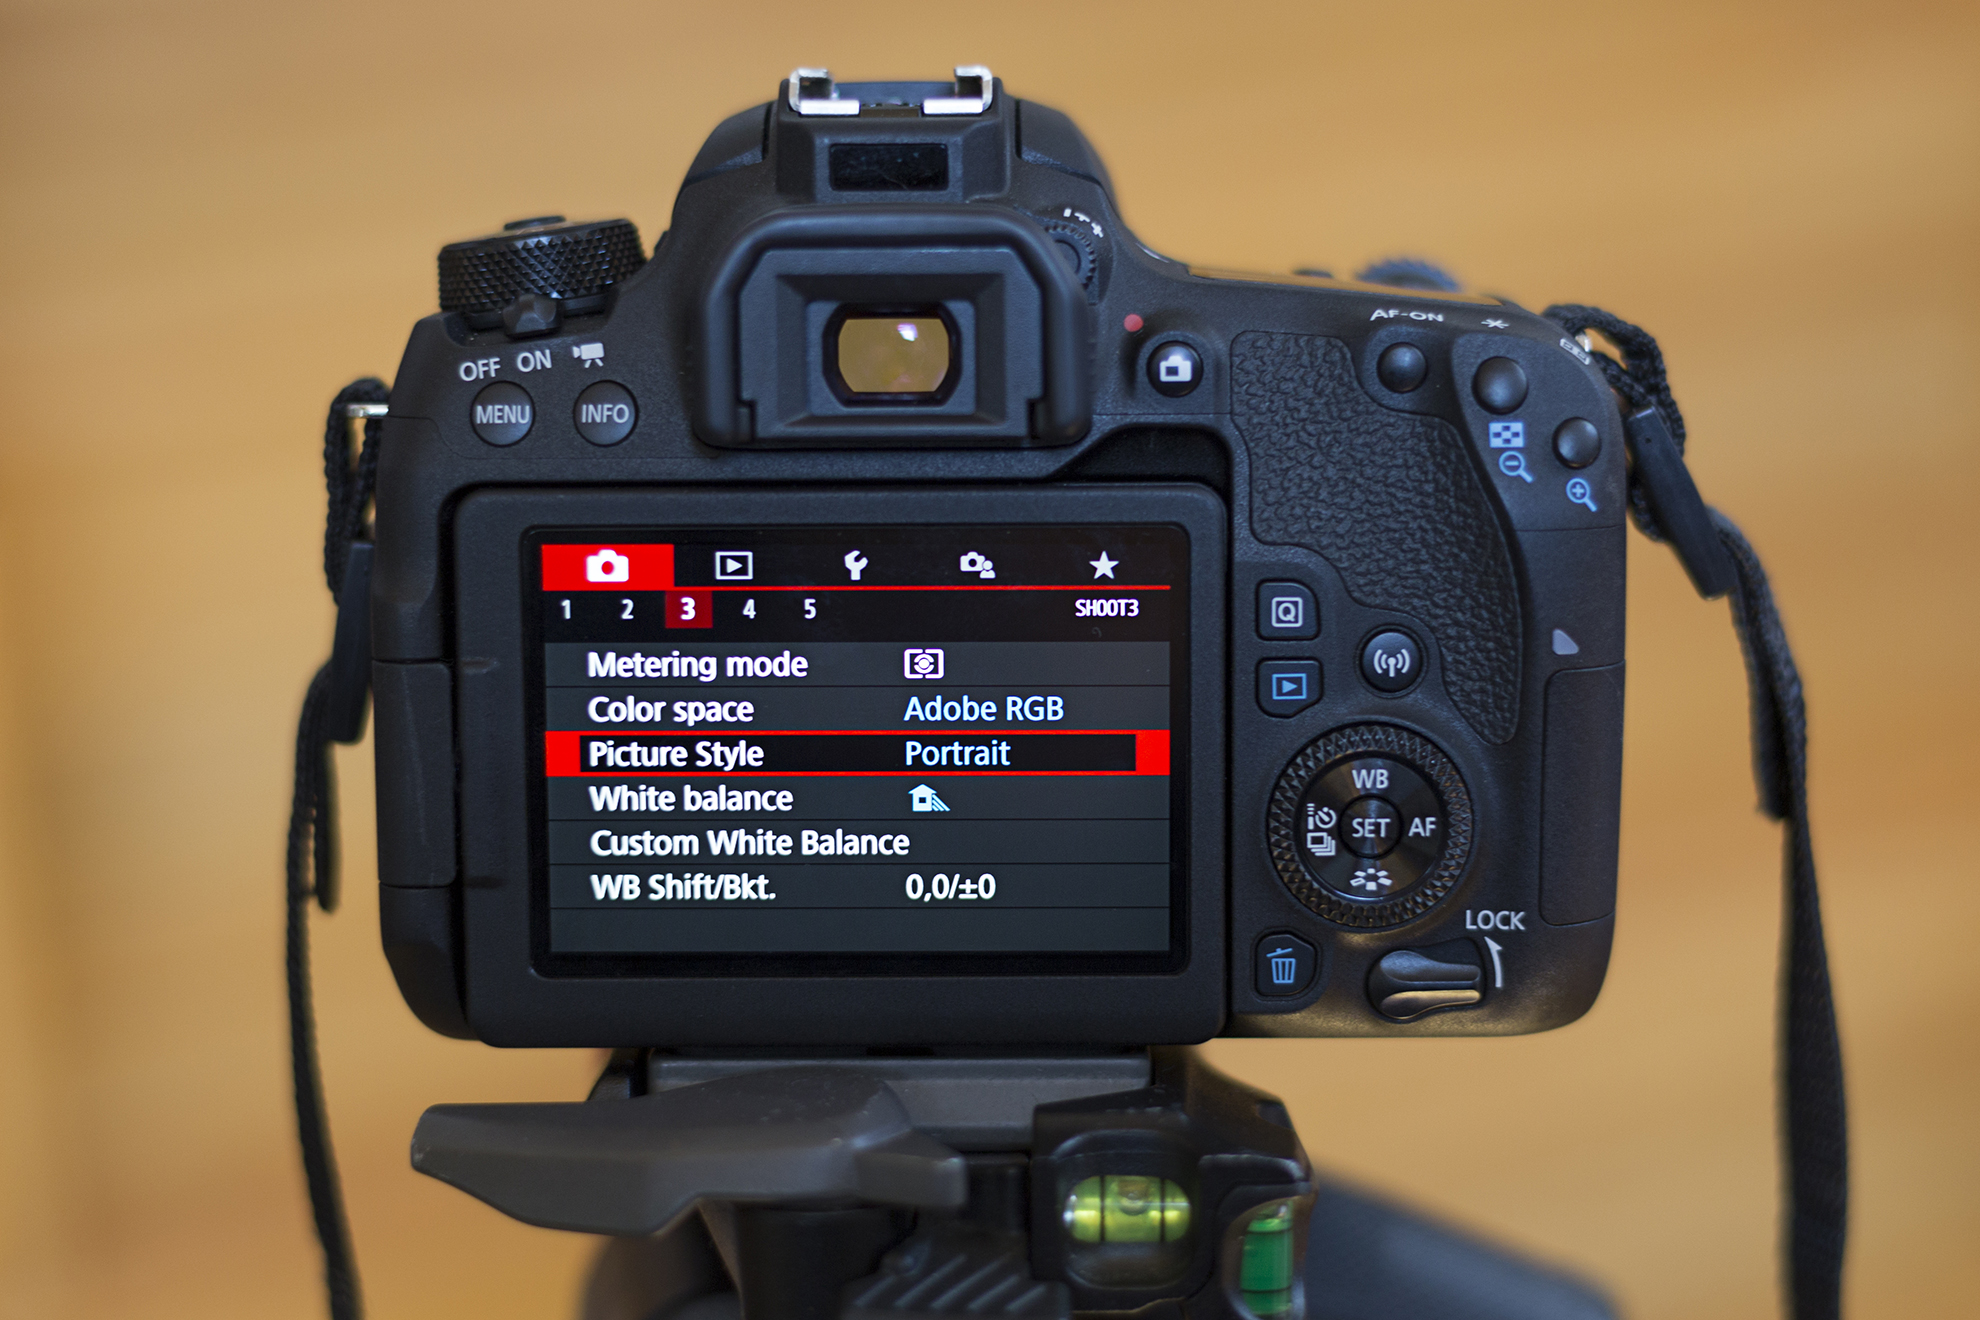 Photo of EOS 77D in picture style shooting mode